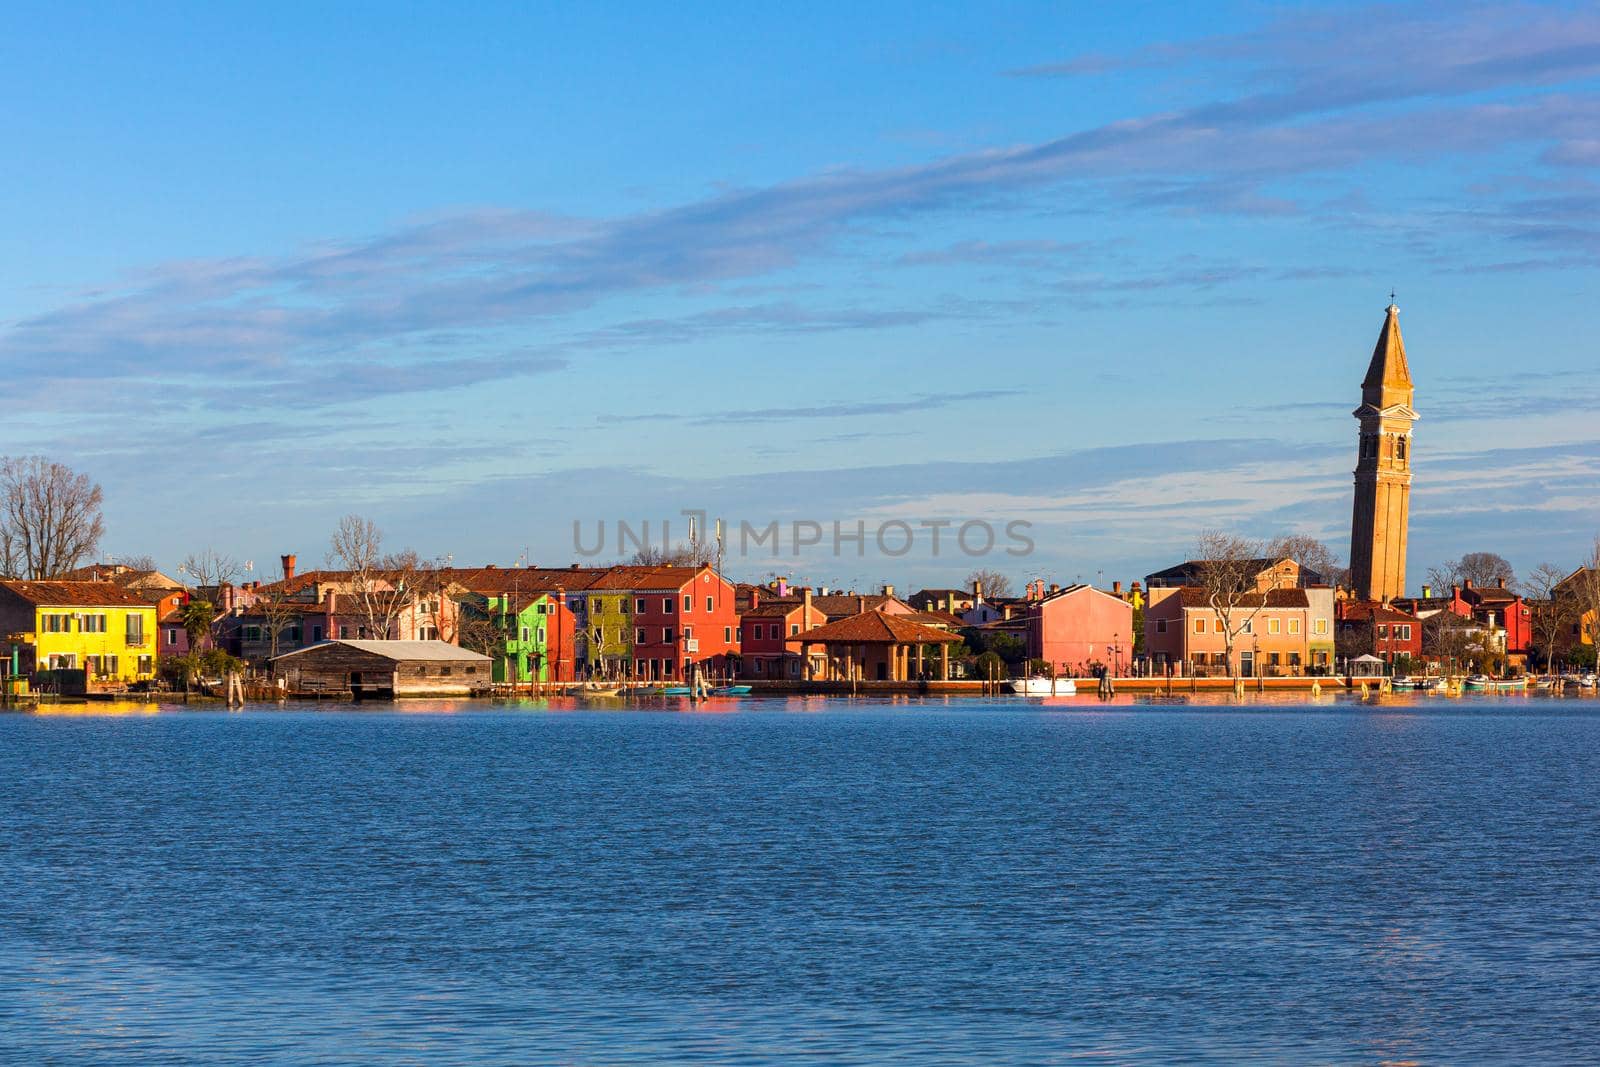 View of the Leaning Bell Tower of the Church of San Martino in Burano Island - Venice Italy